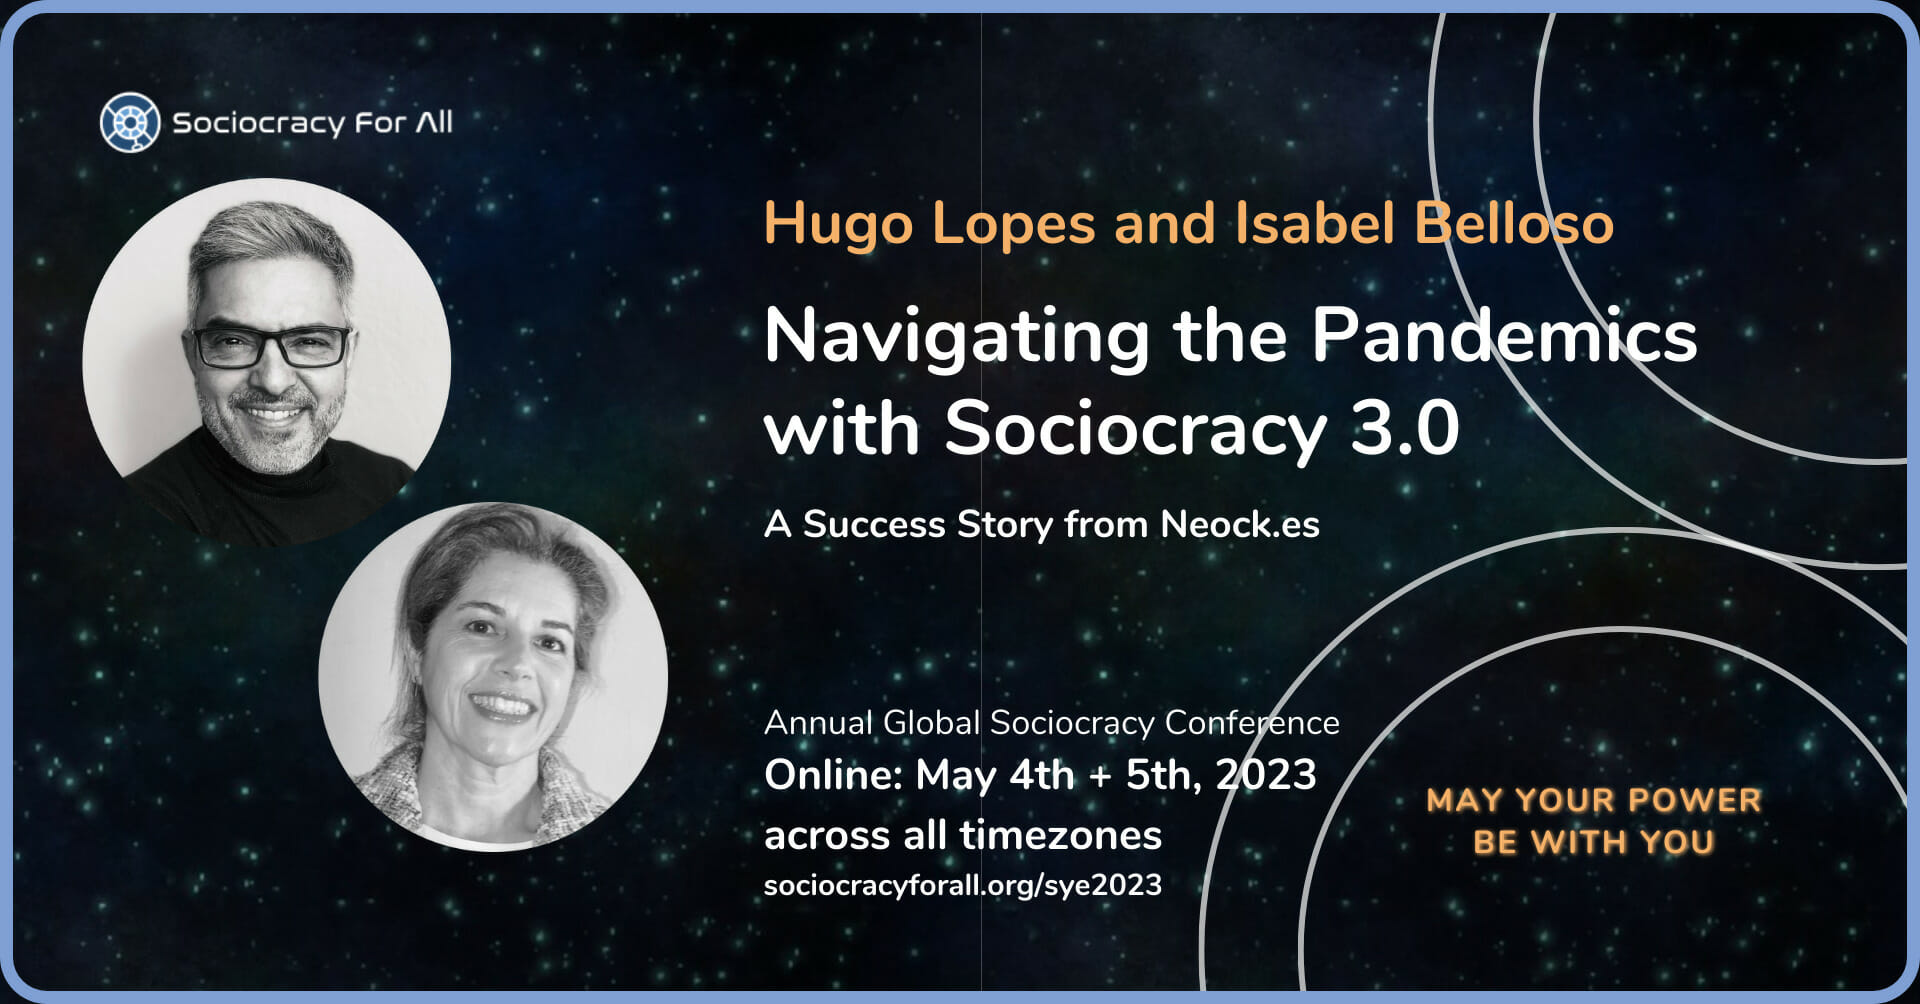 Navigating the Pandemics with Sociocracy 3.0